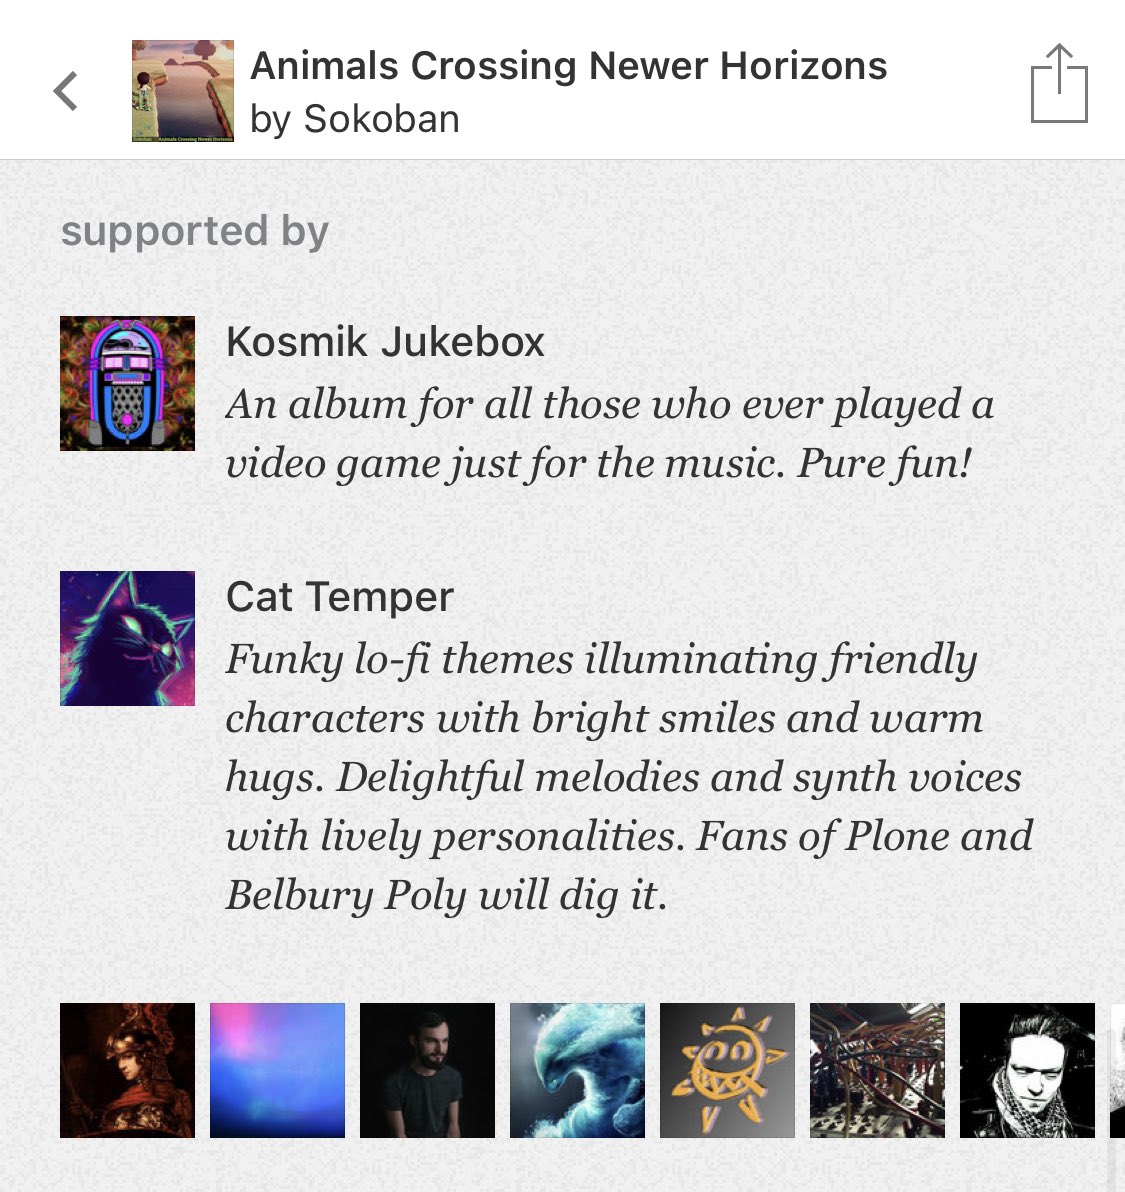 Have you ever played a video game just for the music? Or do you at least like video games?Then  @Sokoban_chill’s  #AnimalCrossingNewHorizons album is for you. As Cat Temper observed: “delightful melodies and synth voices with lovely personalities”. https://binaural-space.bandcamp.com/album/animals-crossing-newer-horizons